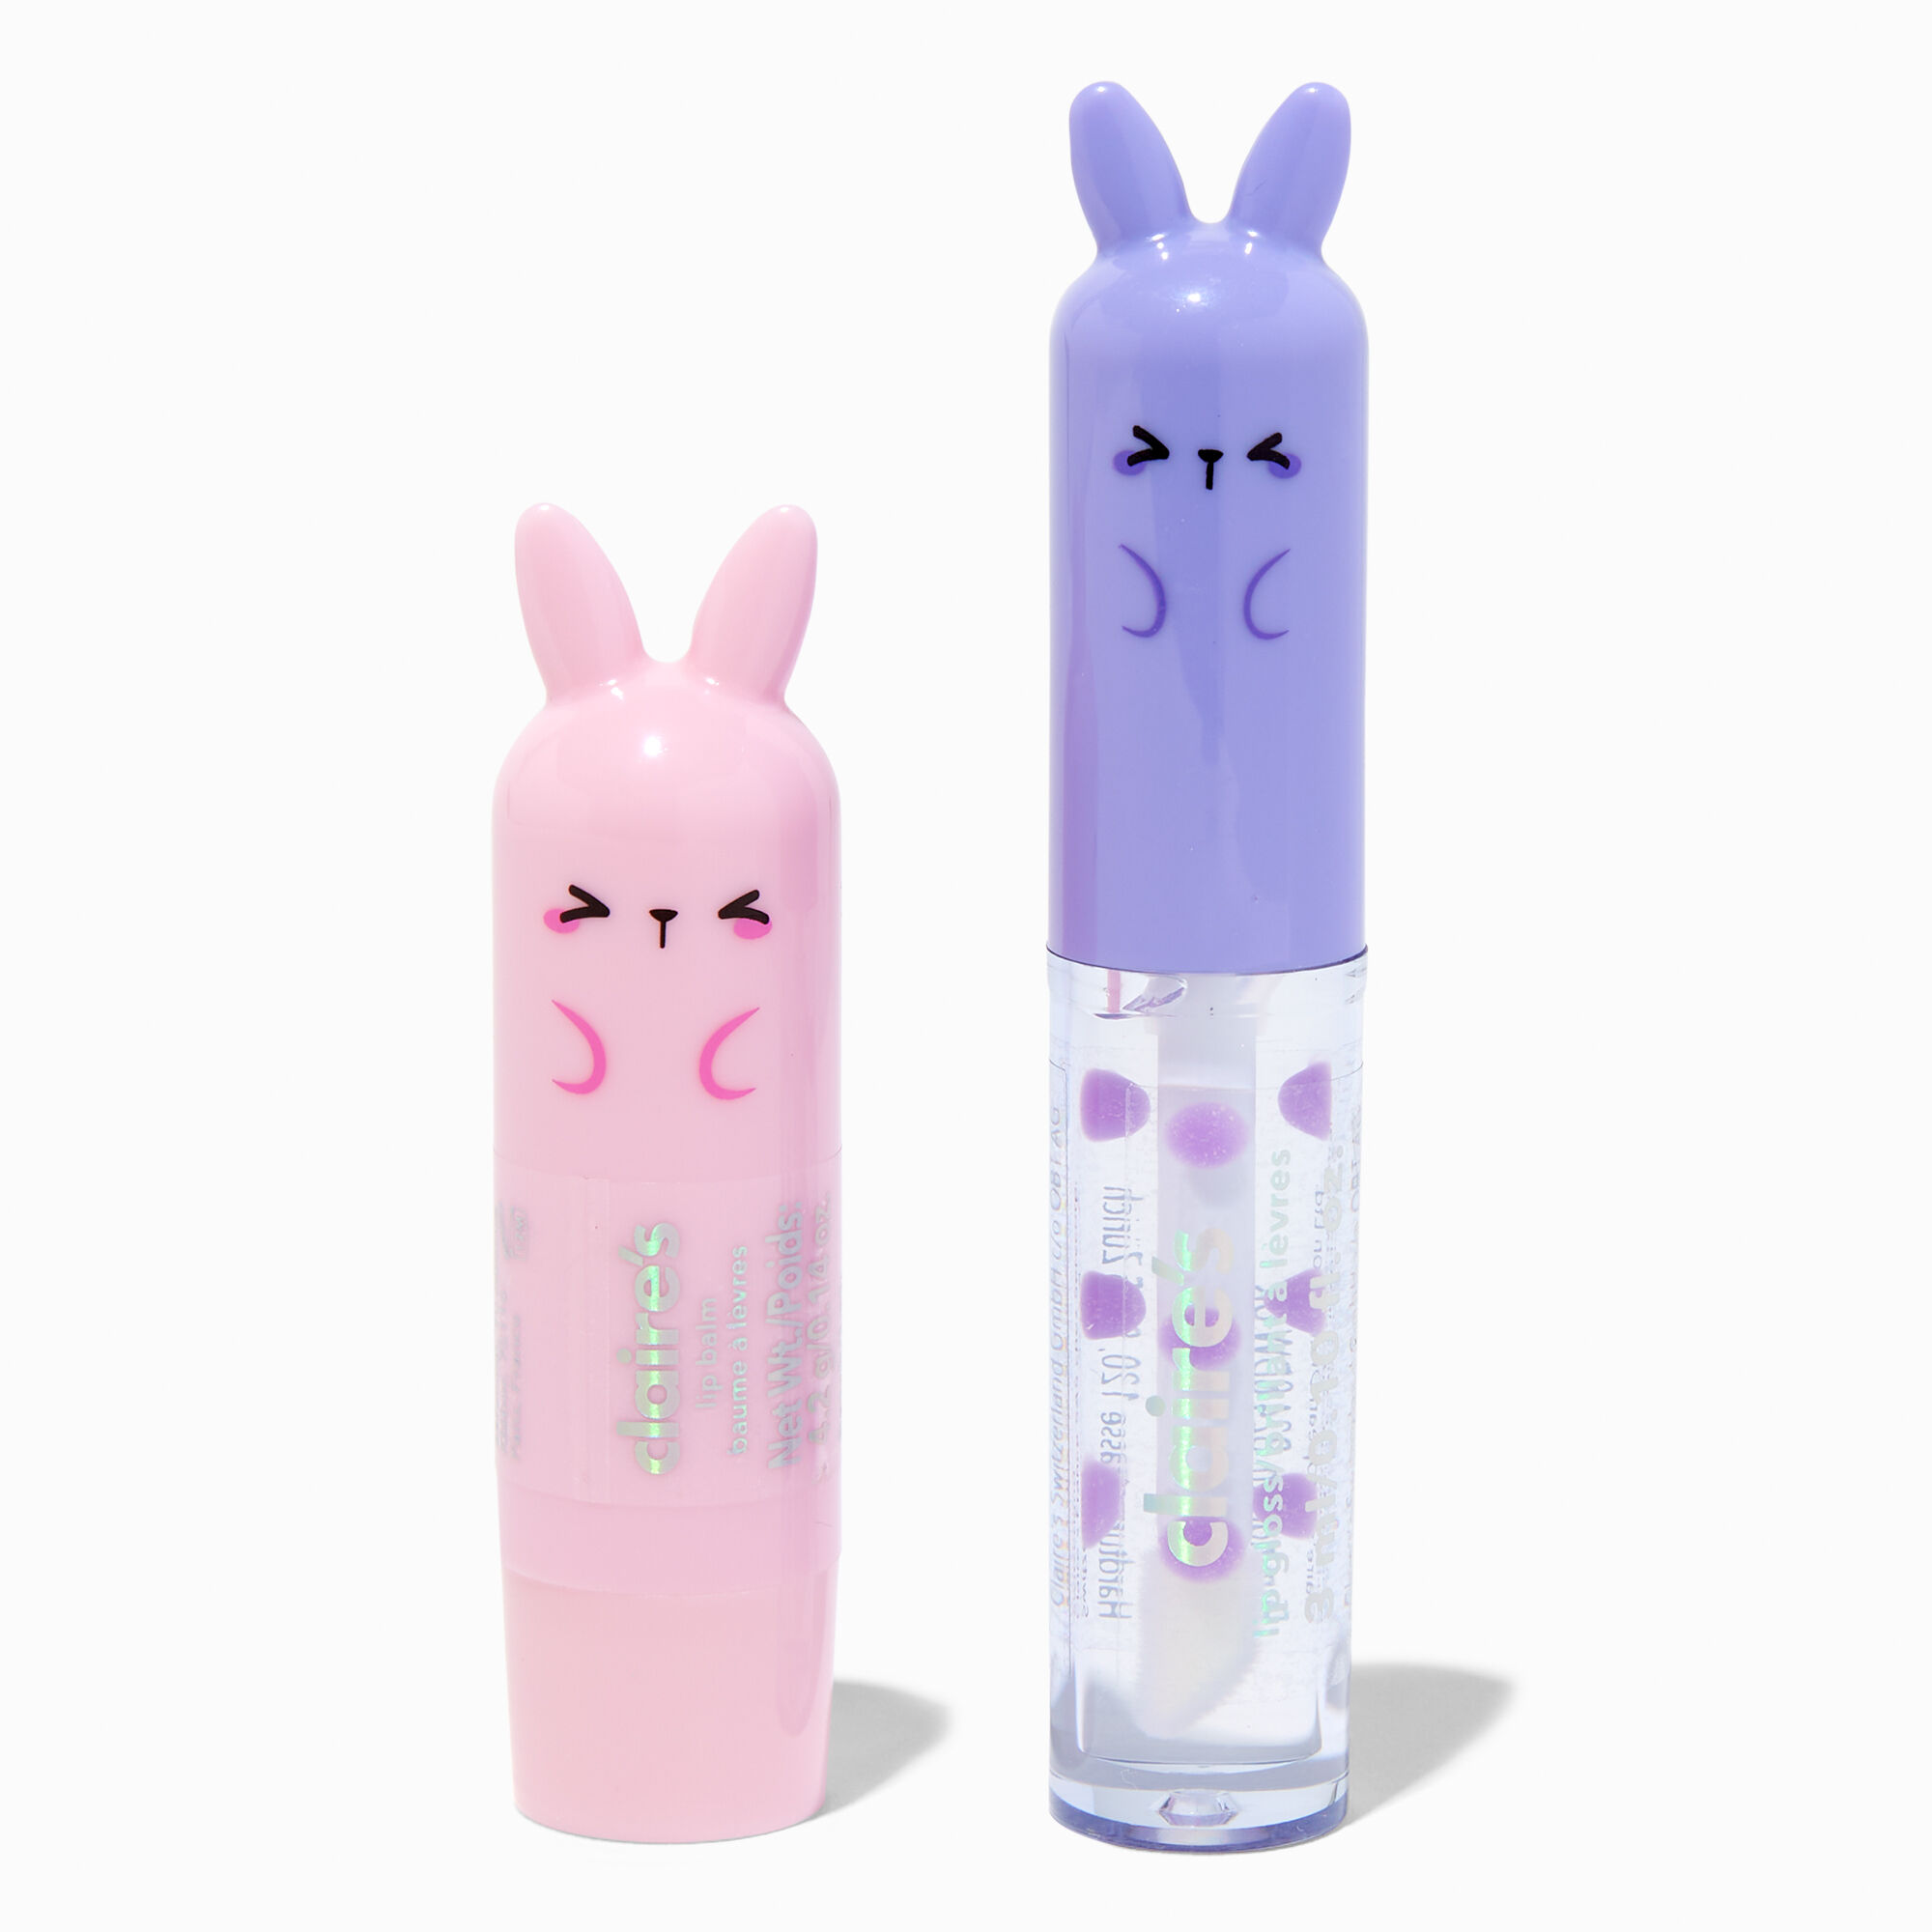 View Claires Chibi Bunny Lip Gloss Set 2 Pack information